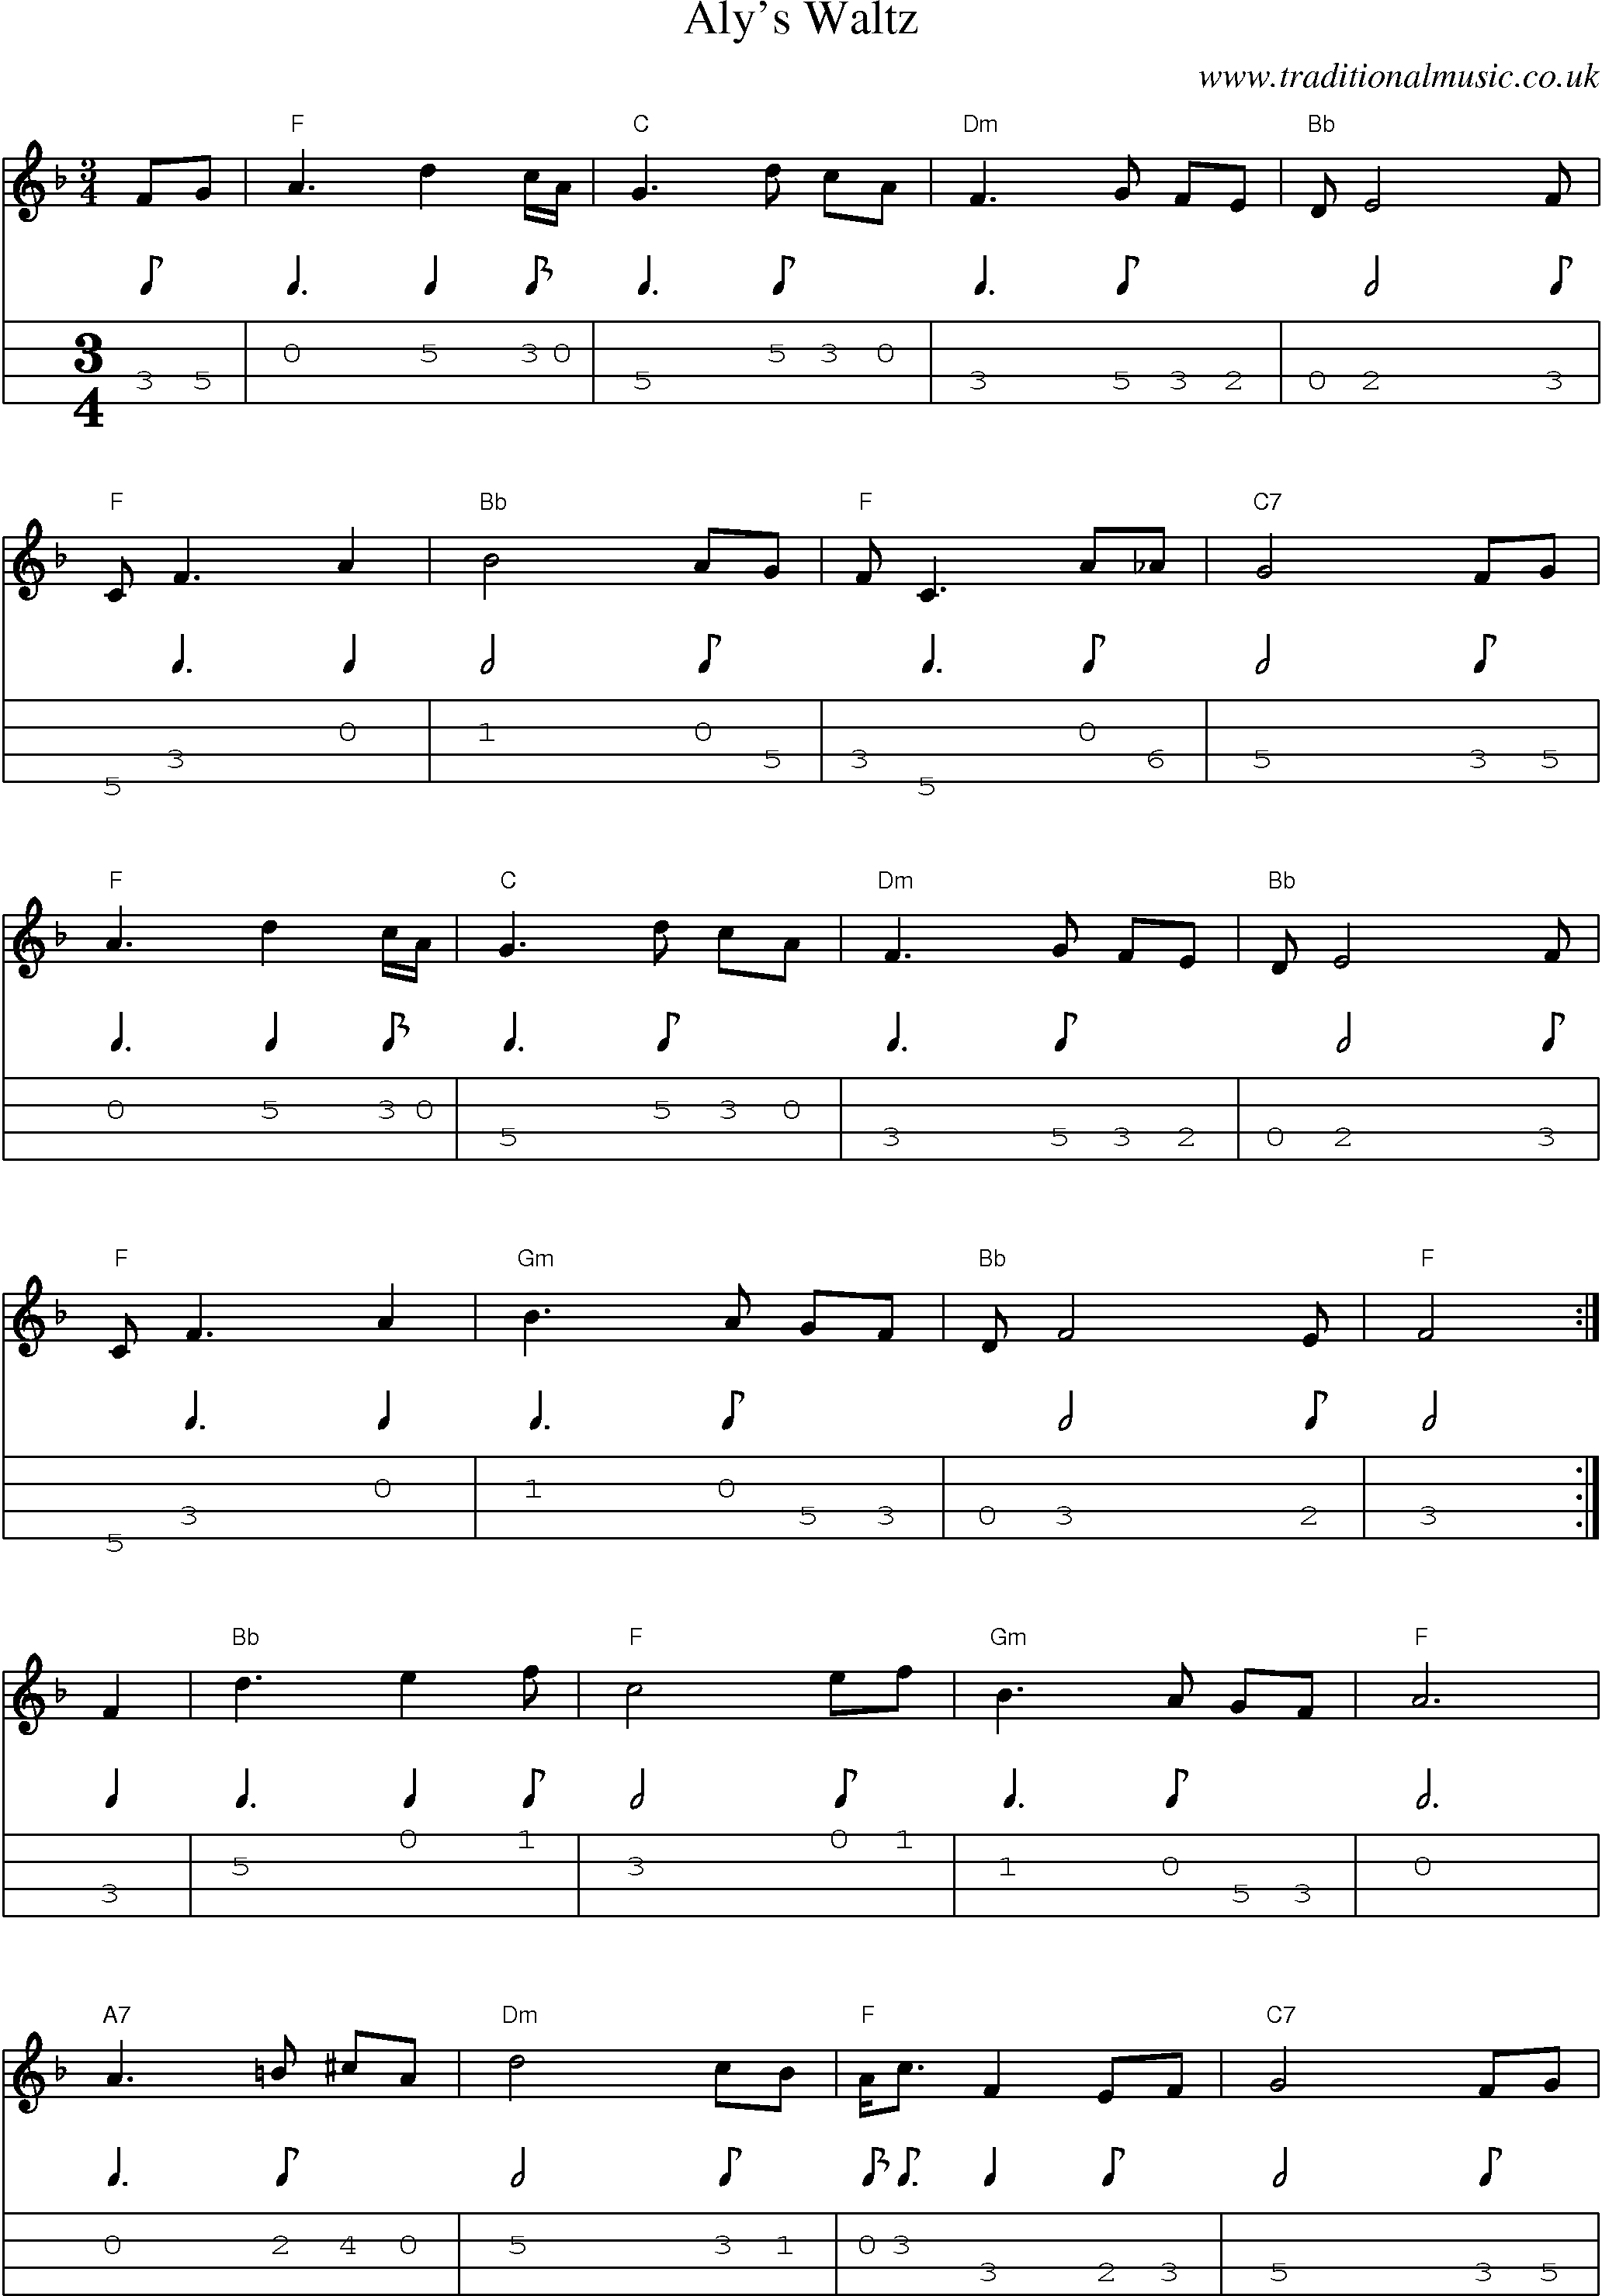 Music Score and Mandolin Tabs for Alys Waltz